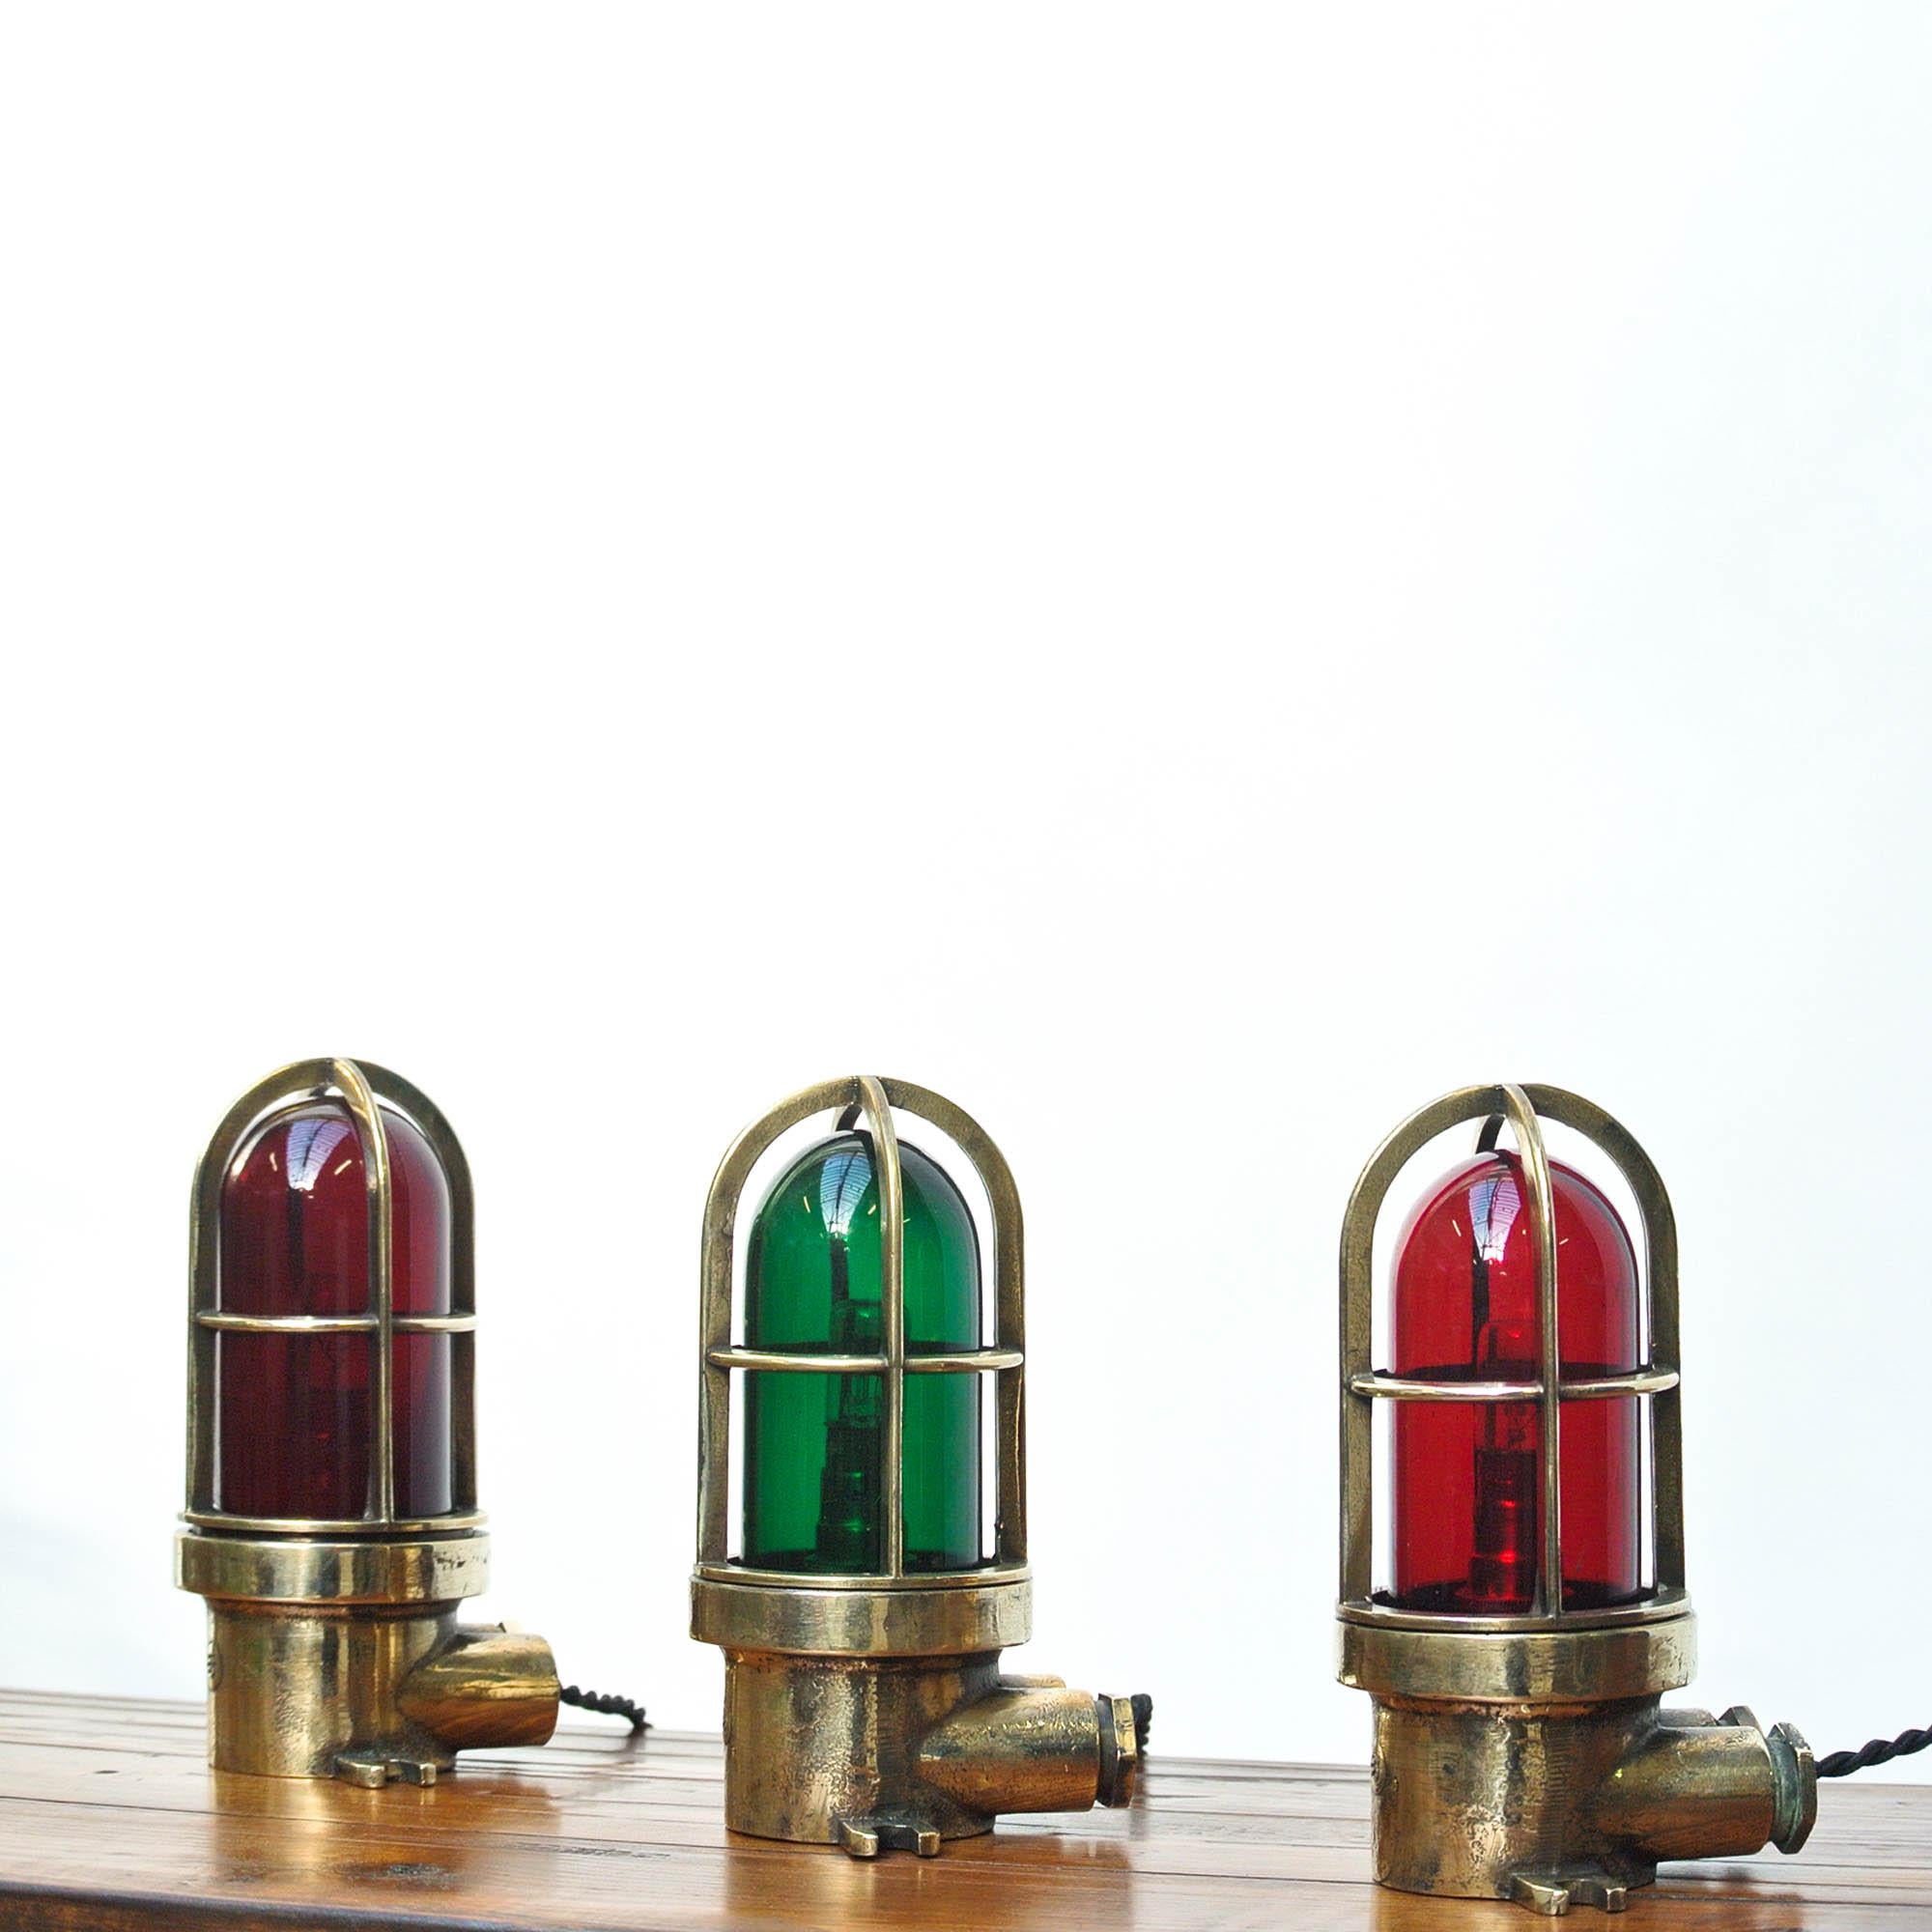 Polished Set of 3 Small Signal Lamp in Brass and Colored Glass, France, circa 1950-1959